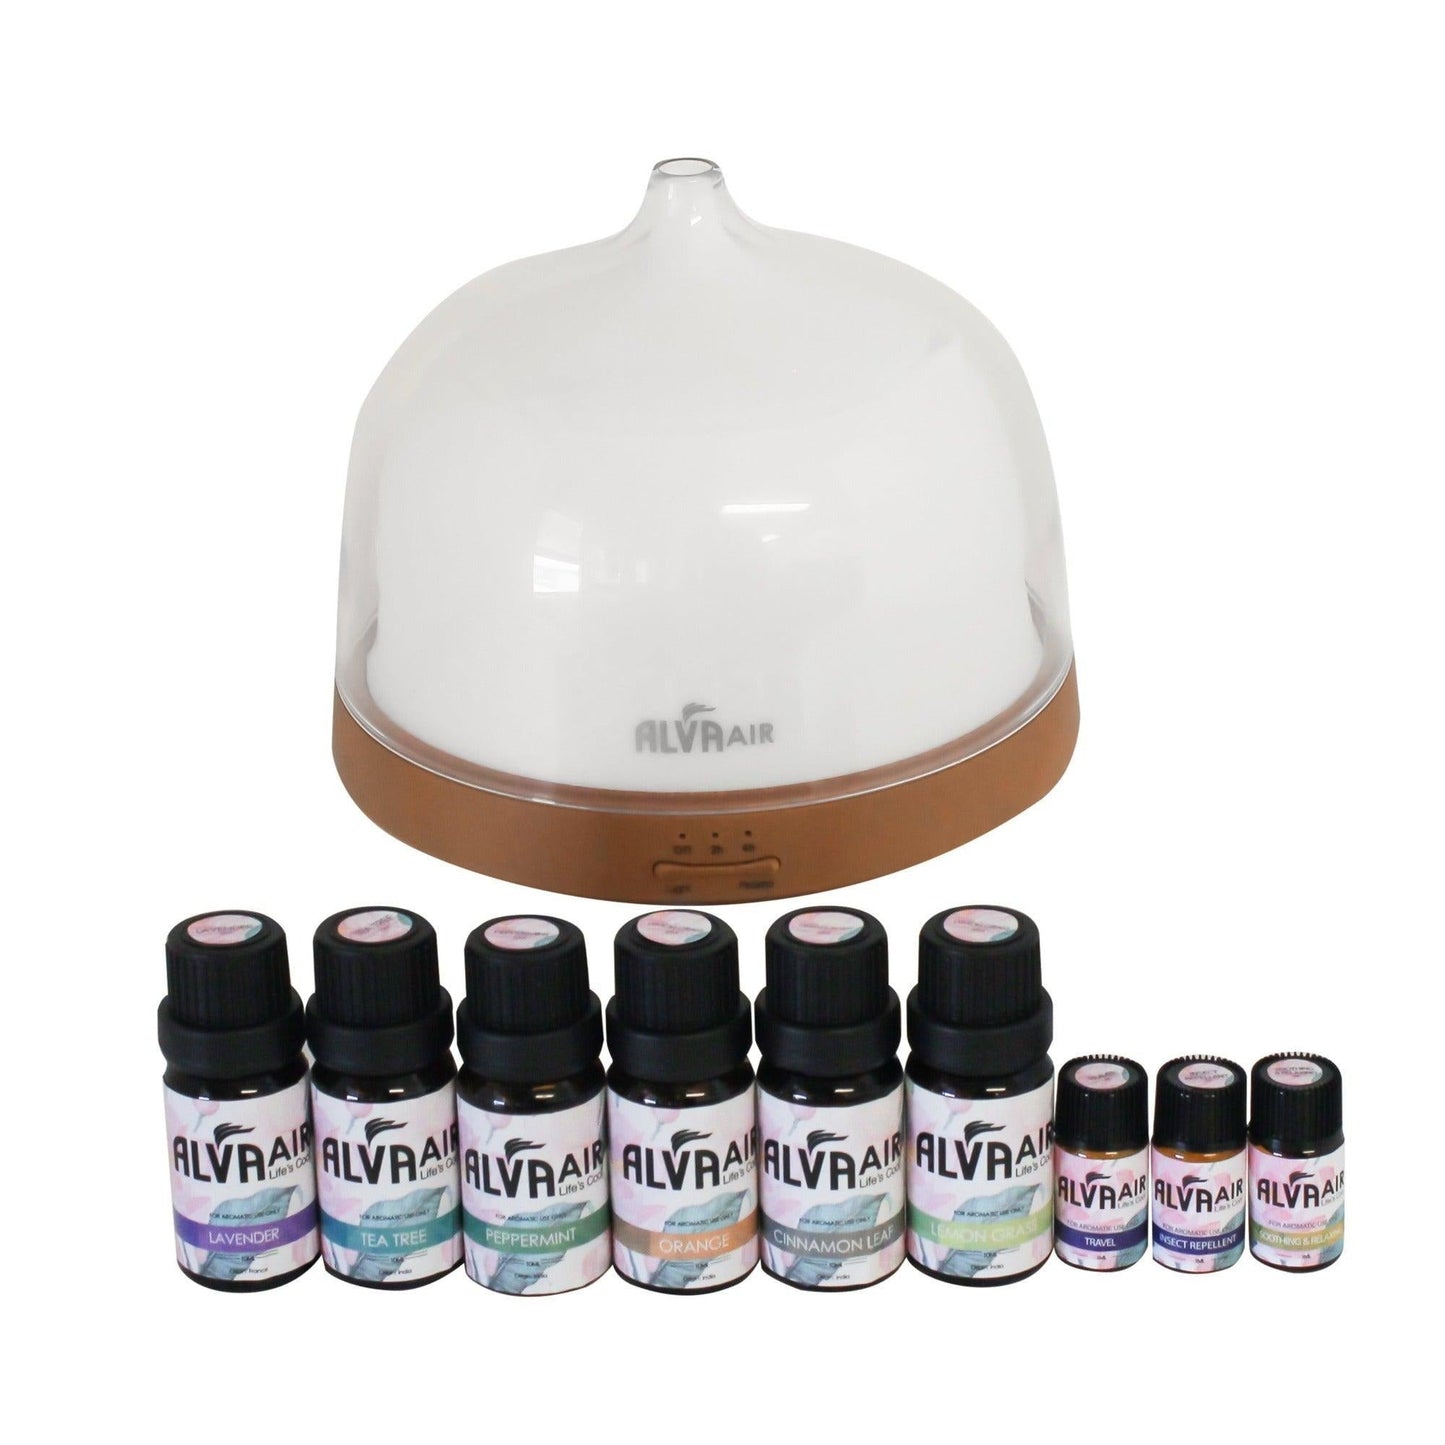 DIFFUSER FOR AROMATHERAPY ESSENTIAL OILS & 9PC OILS VALUE BUNDLE